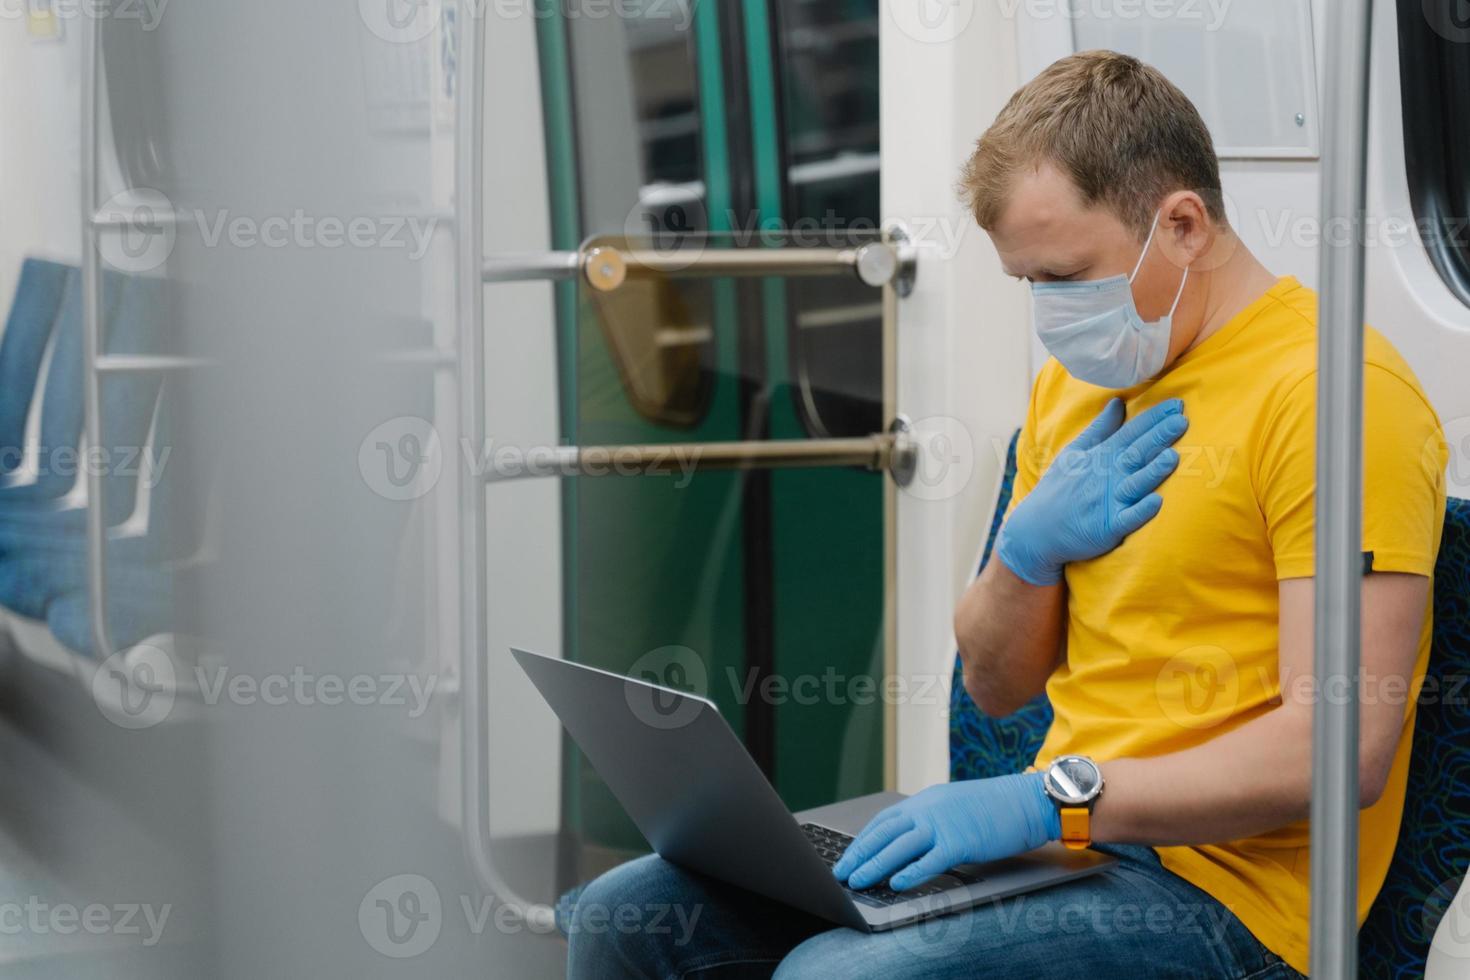 Sick man has problems with breathing, symptoms of coronavirus, concentrated in laptop computer, wears medical mask and gloves, commutes by public transport. Dangerous virus disease spreading photo